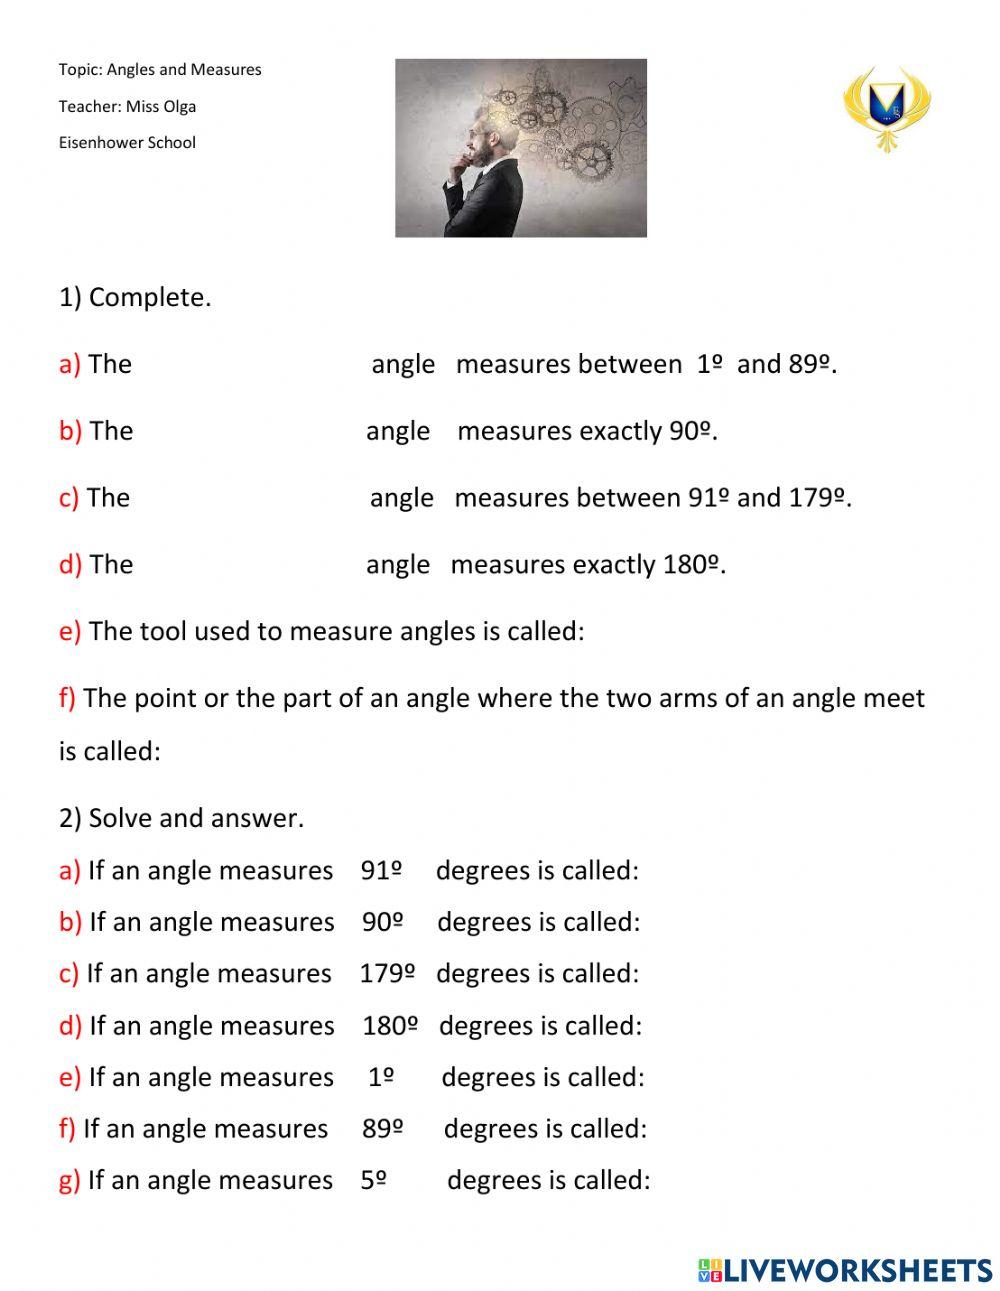 Angles and Measures